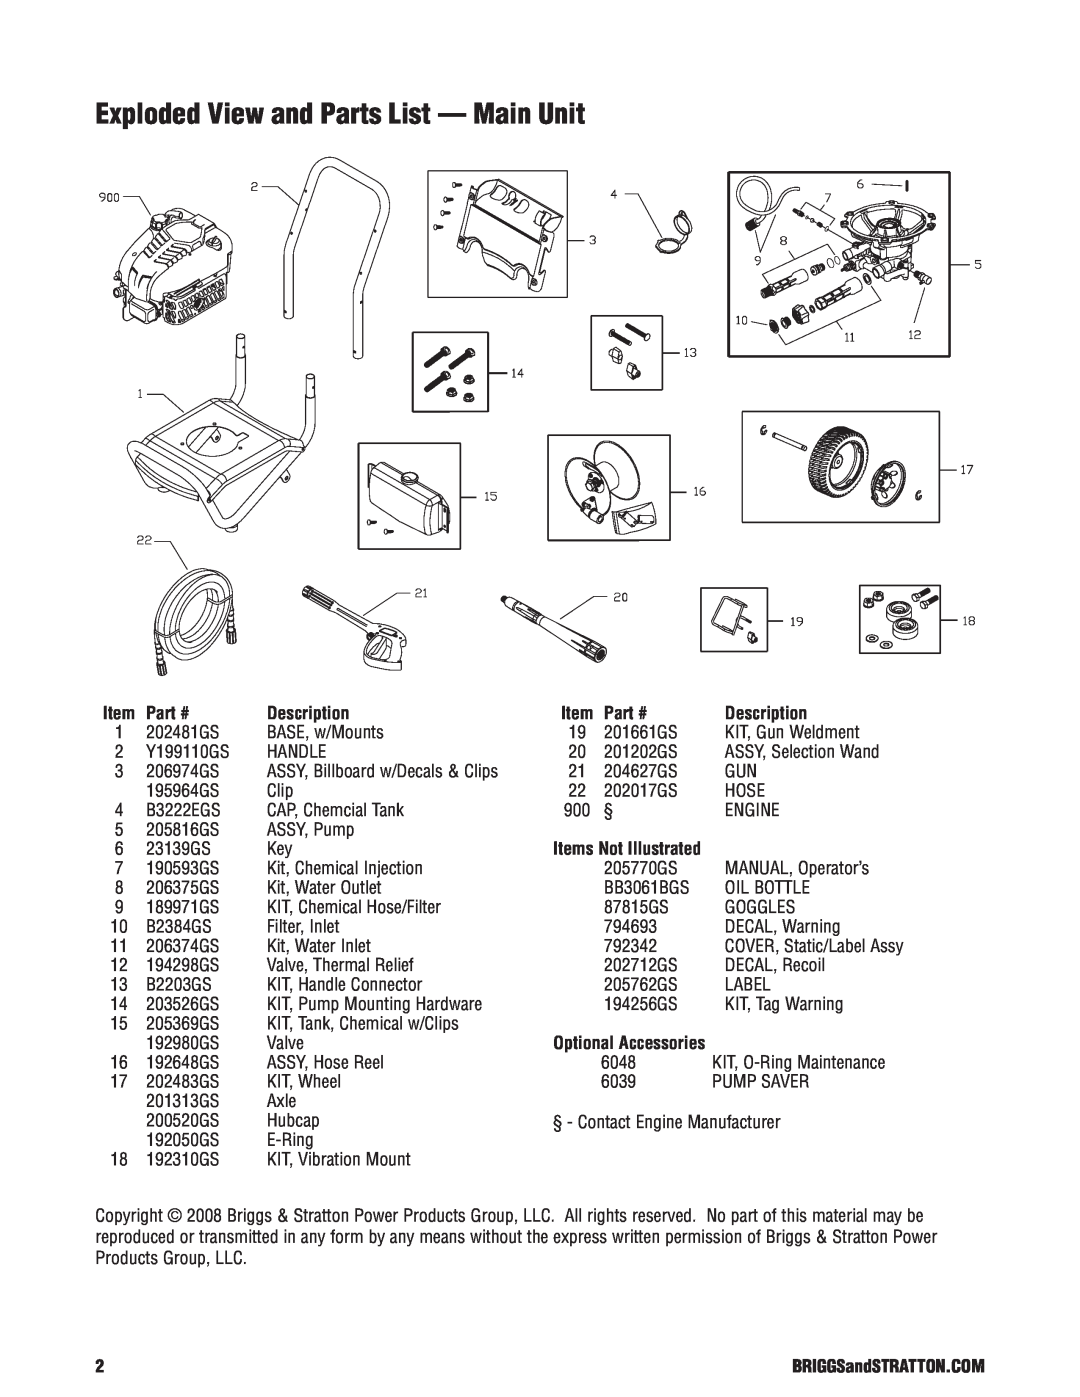 Briggs & Stratton 20362 manual Exploded View and Parts List - Main Unit, Description 